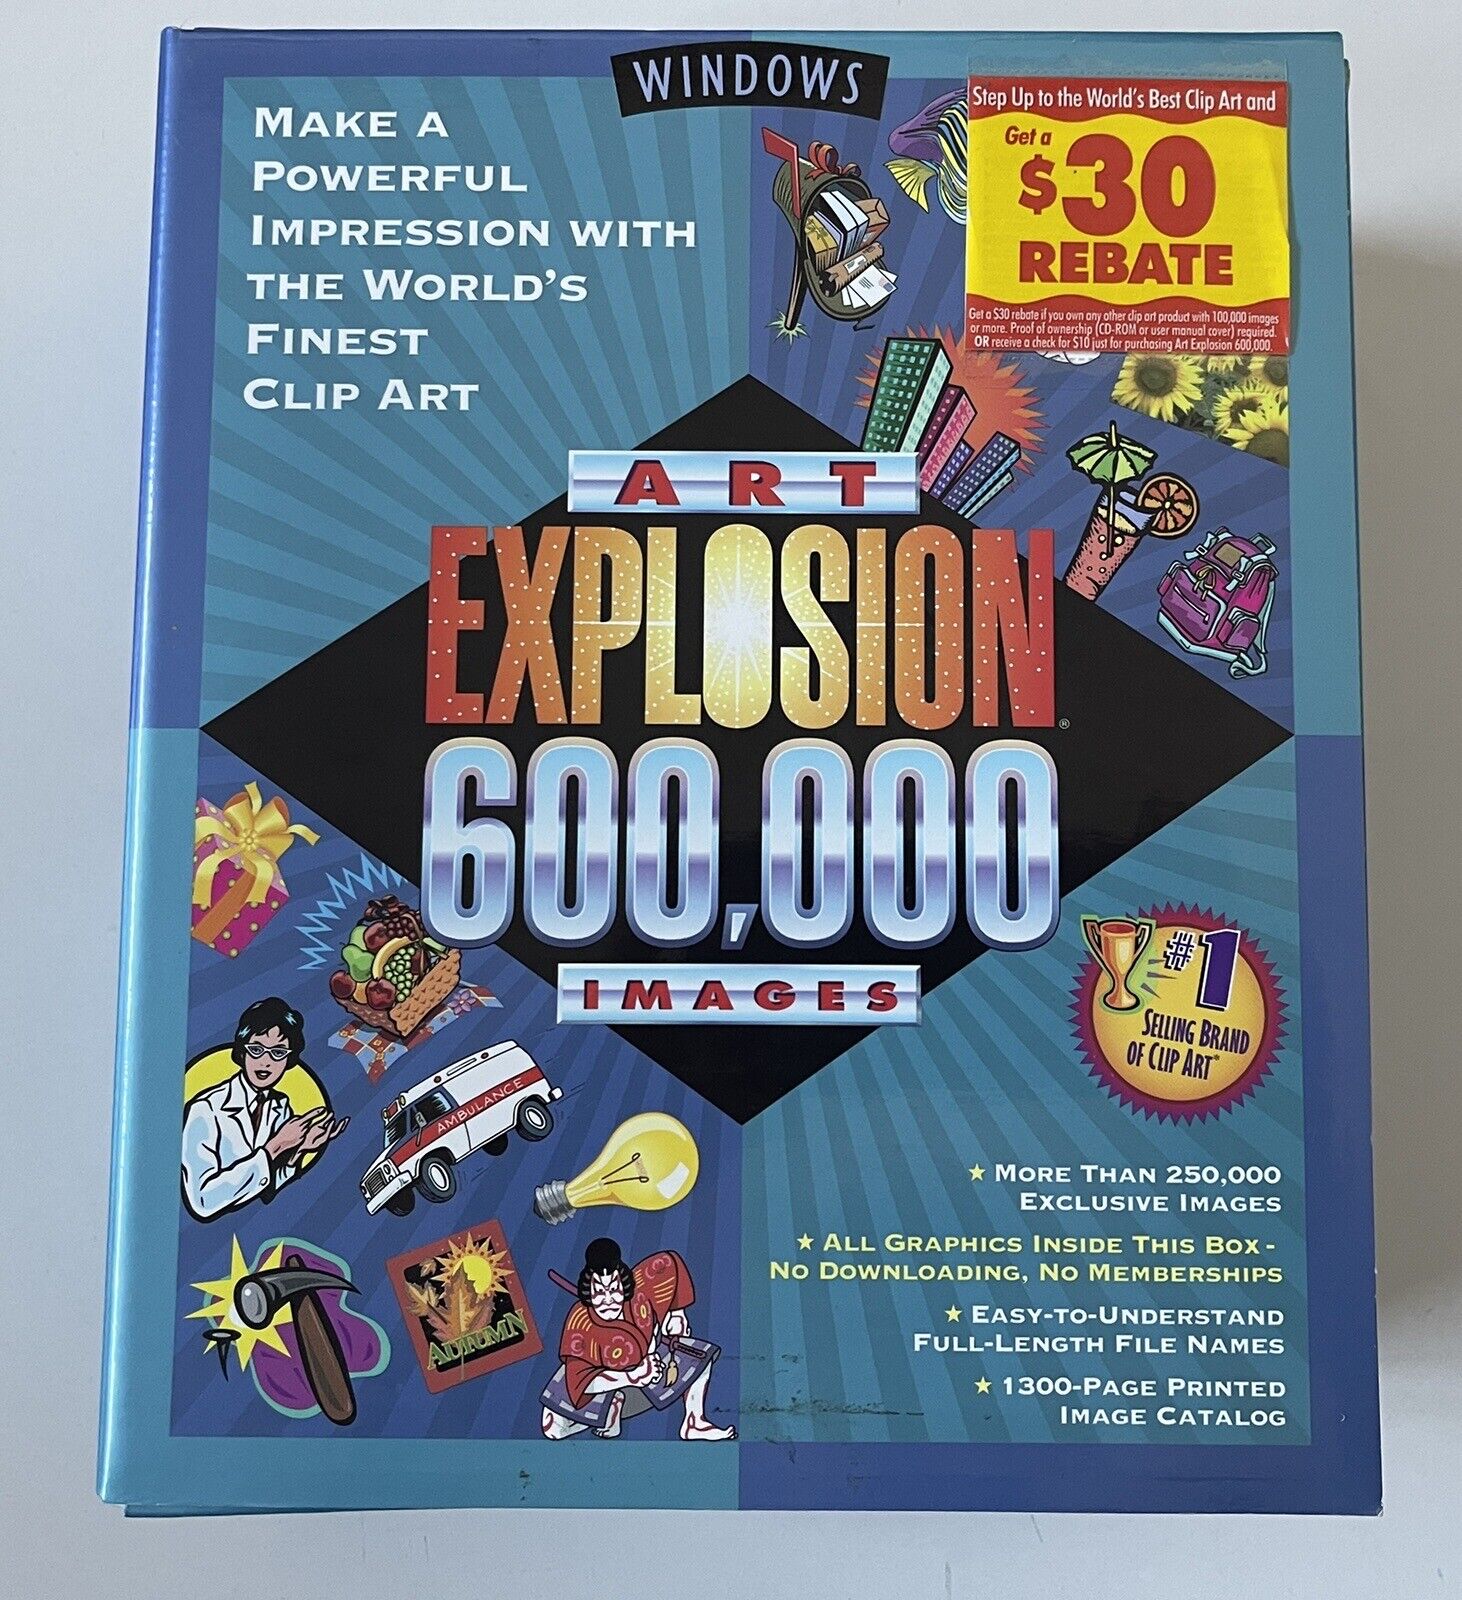 Art Explosion 600,000 Images Clip Art Software 29 CDs Windows. Brand New. Sealed